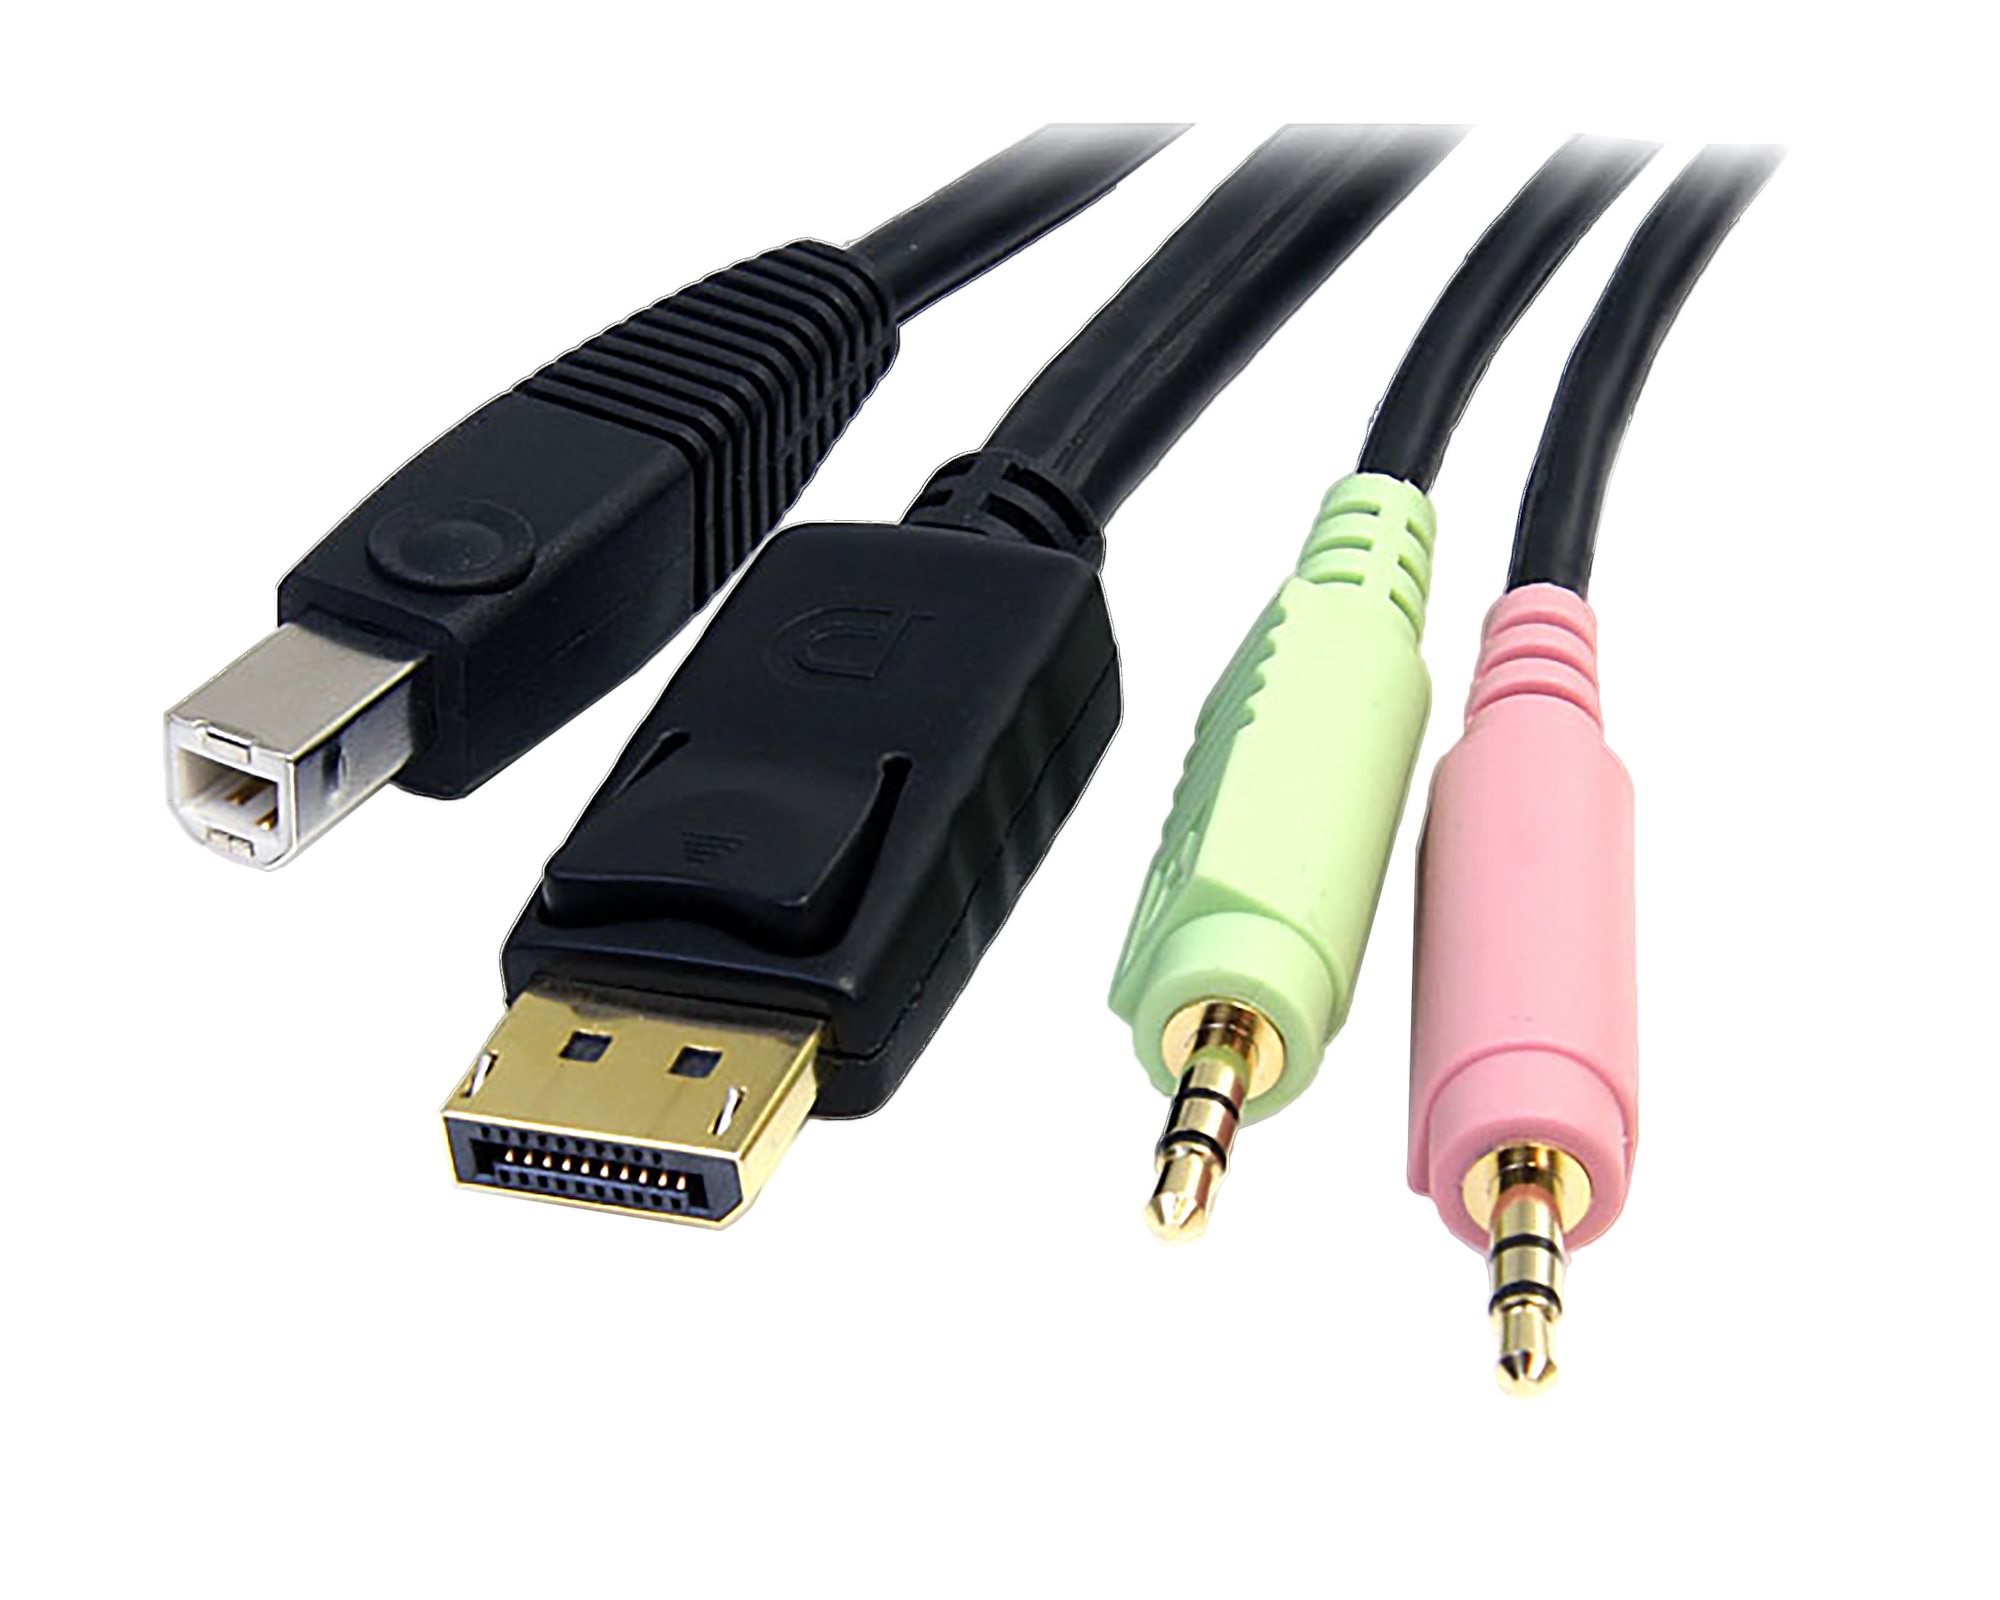 4-in-1 USB DisplayPort KVM Switch Cable - KVM Cables